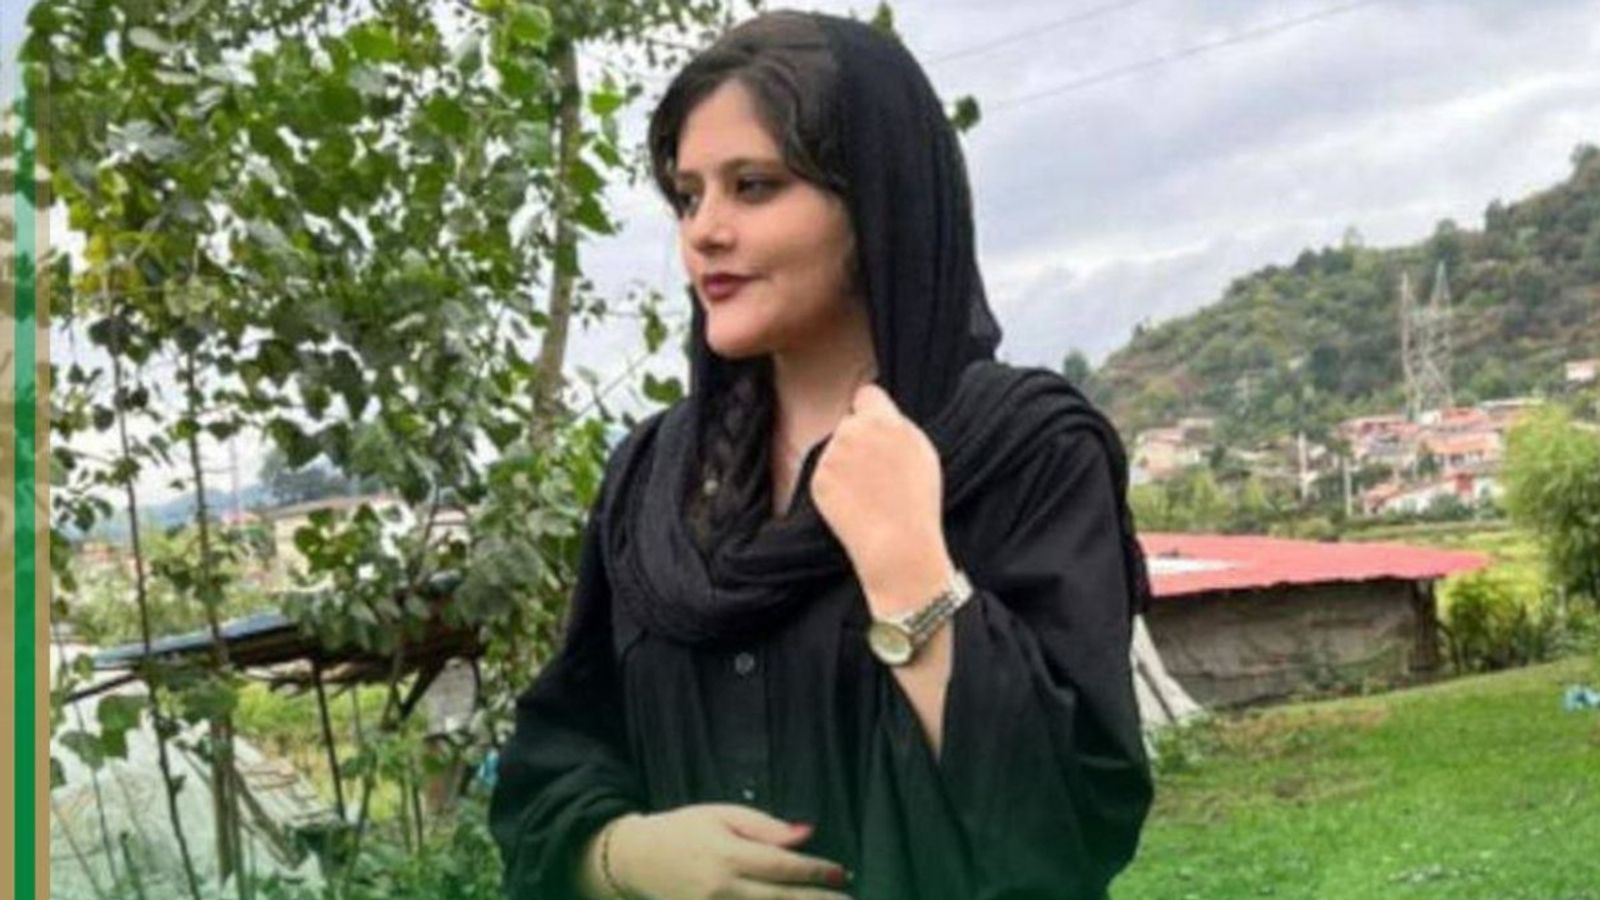 Mahsa Amini was 'tortured and insulted' before death in police custody in Iran, her cousin says 